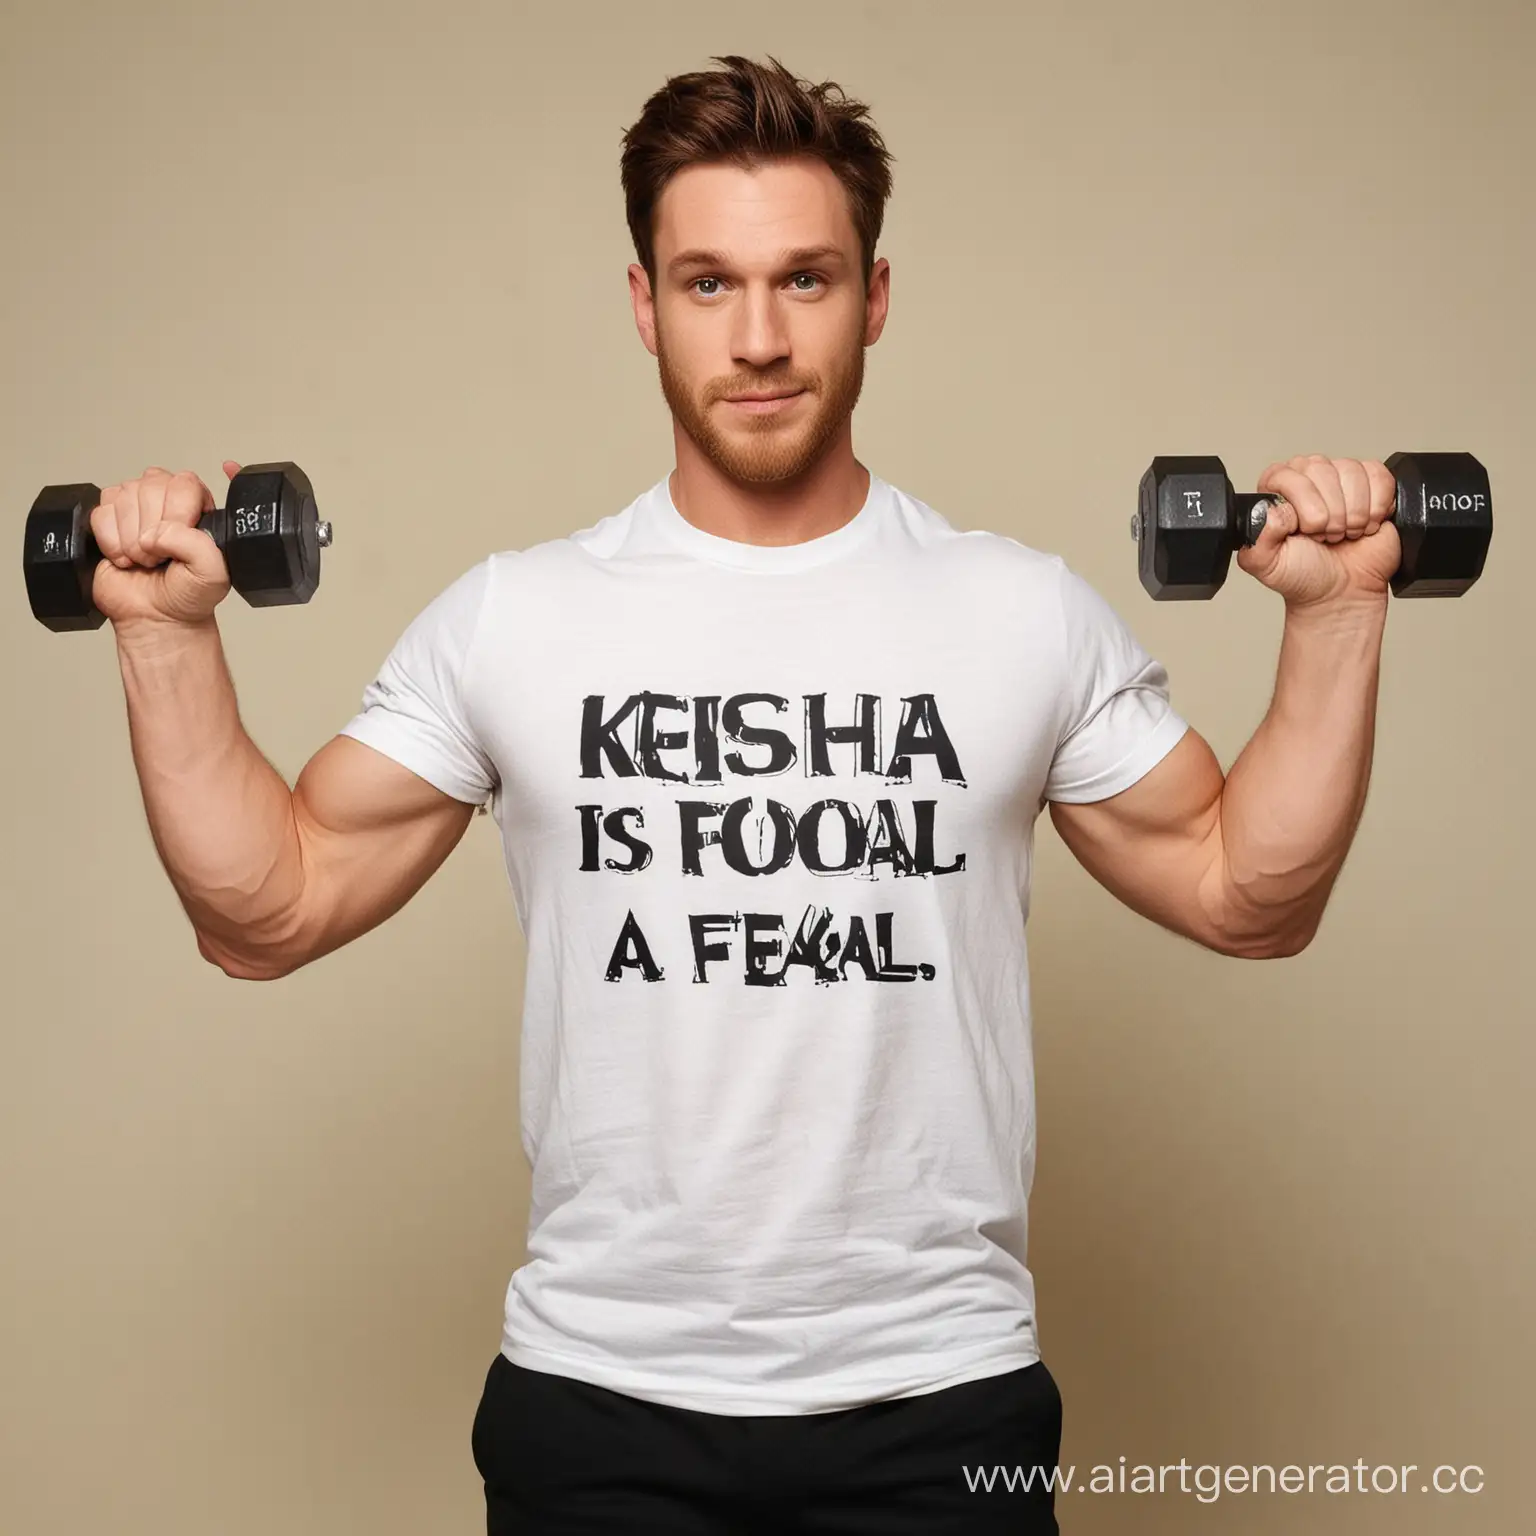 Fitness-Enthusiast-Patrick-Working-Out-with-Dumbbell-and-Unique-Tshirt